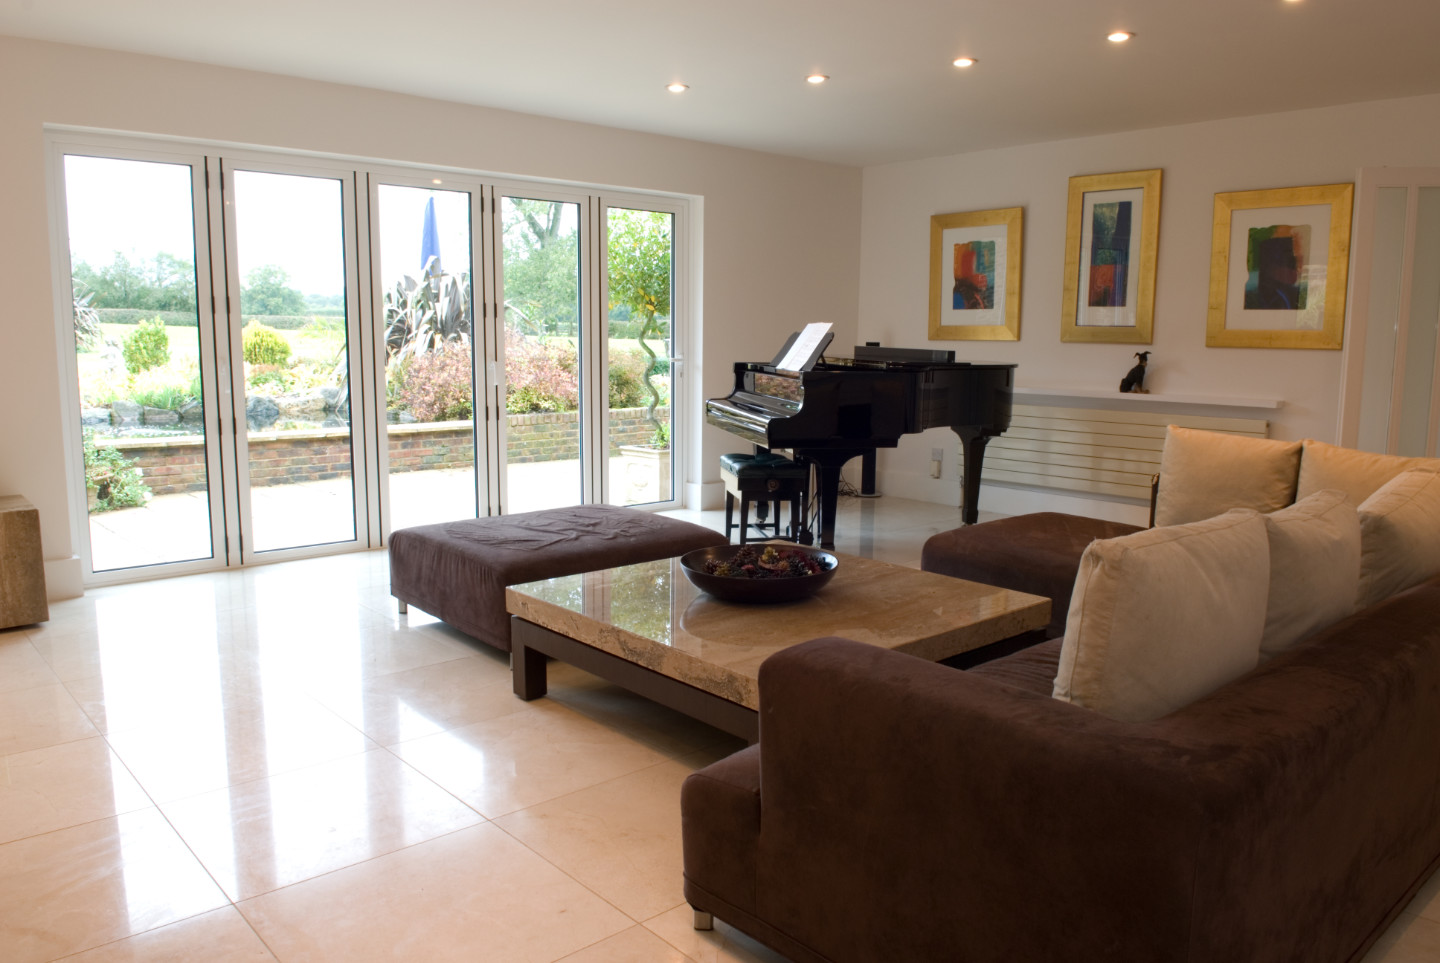 Visoglide bifolding doors in a luxurious living room with a grand piano